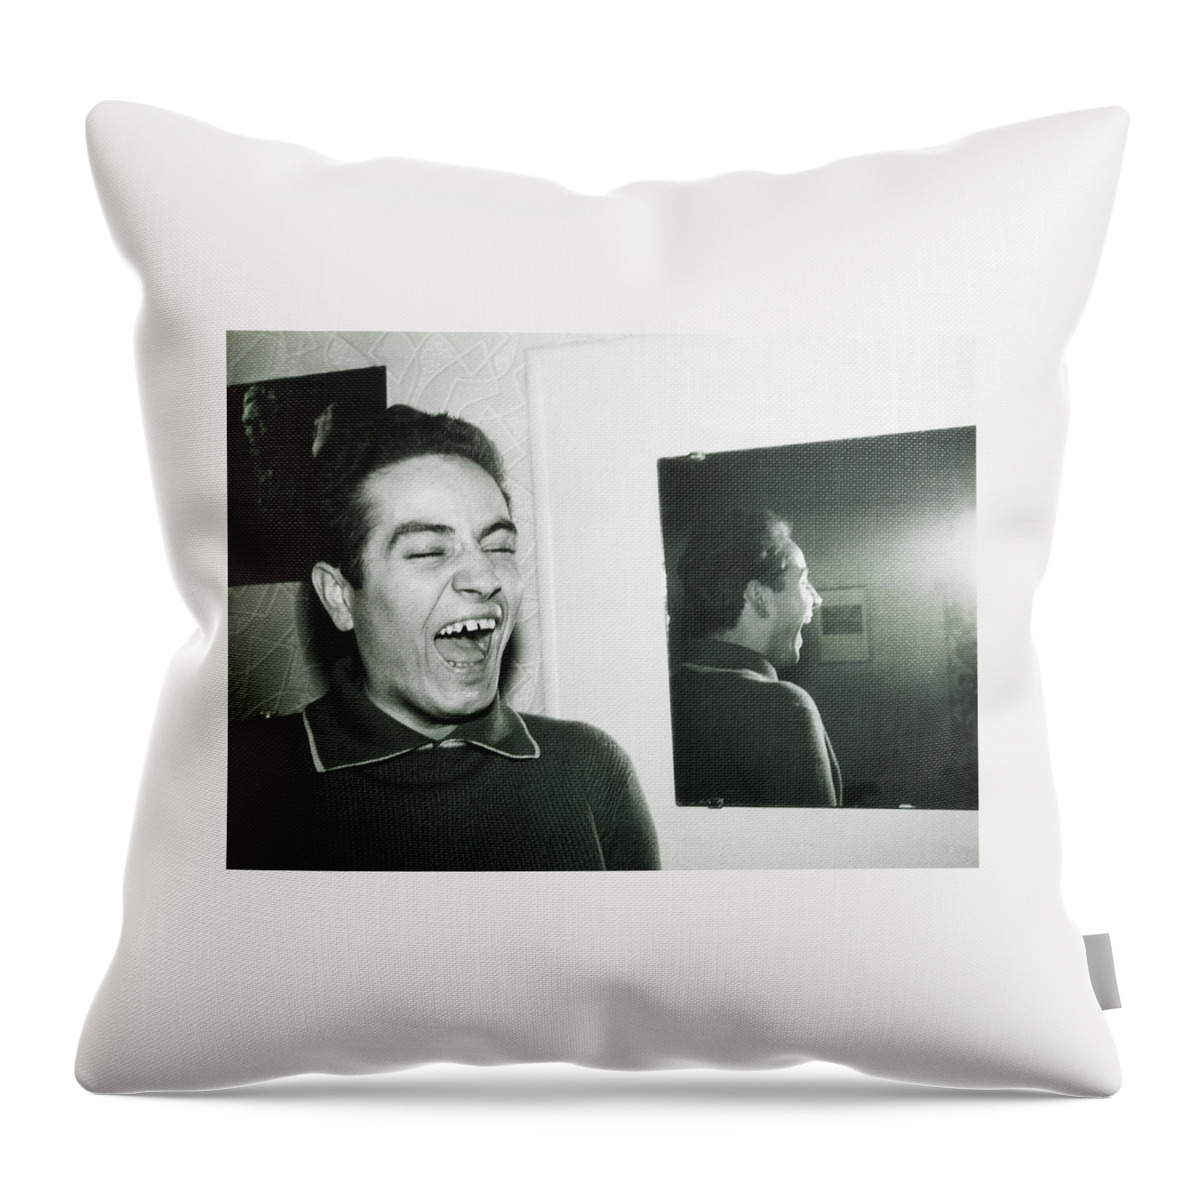 My Brother Throw Pillow featuring the photograph Happiness by Hartmut Jager